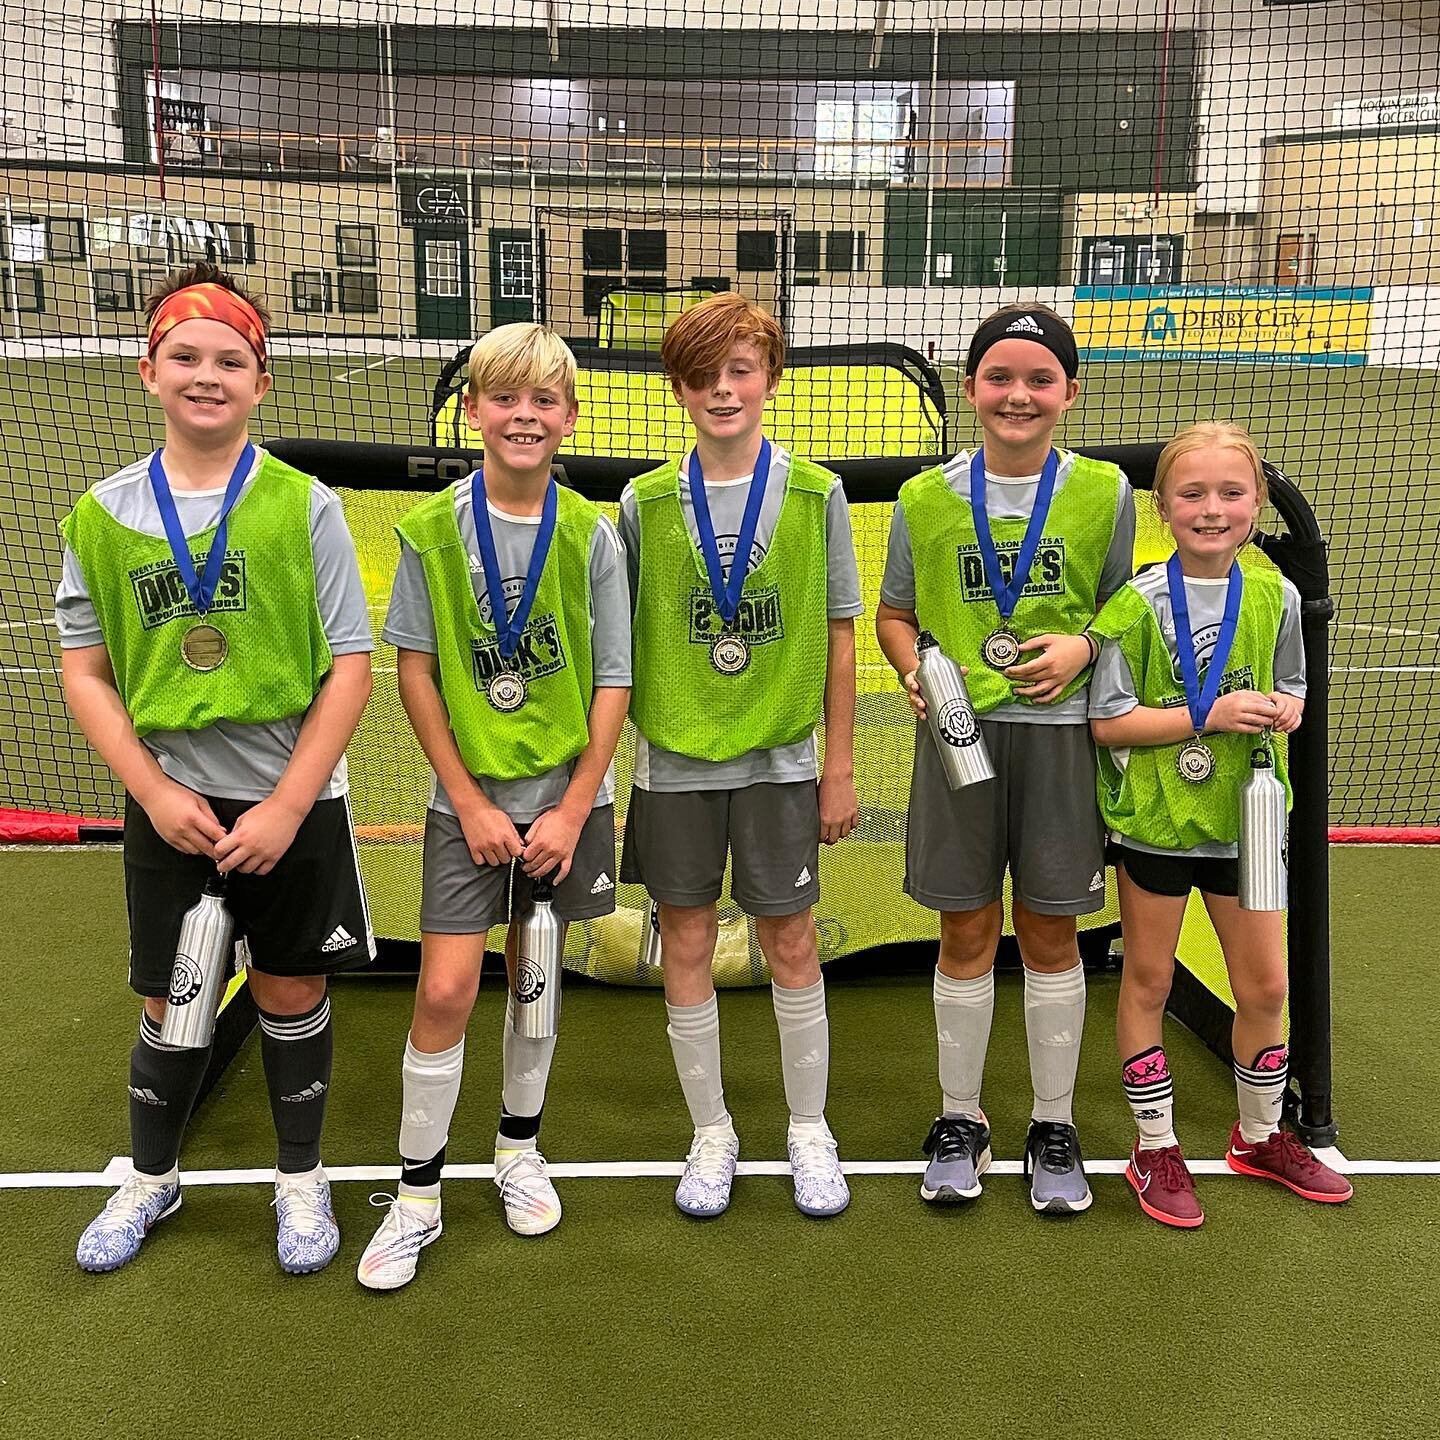 Congratulations to Denmark who were crowned Champions of our annual Black Friday 4v4 Inner Club Tournament in our 2011-2012 age division! #mvpremier #thegoldstandard